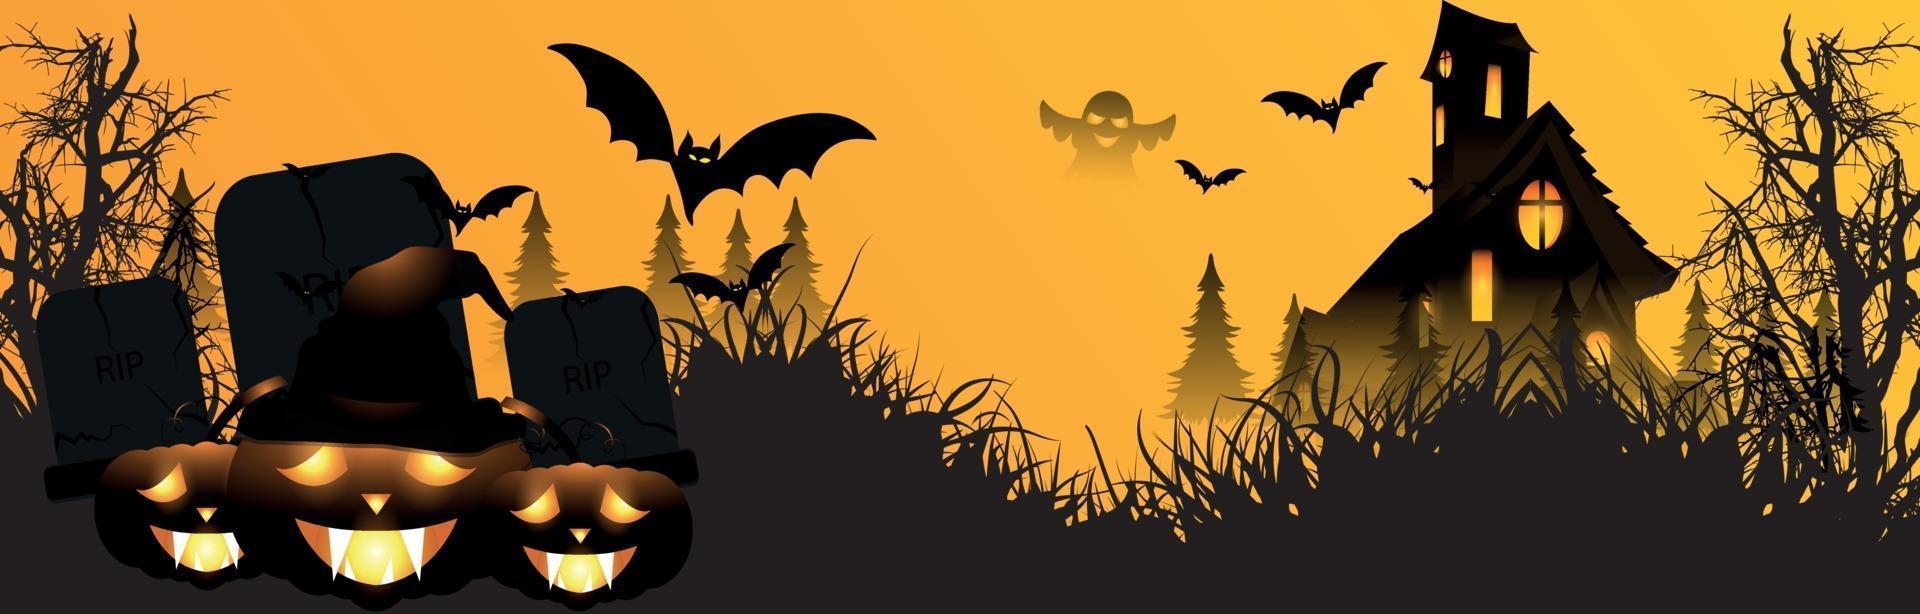 Happy halloween party banner with hounted house glowing pumpkin and flying bats vector